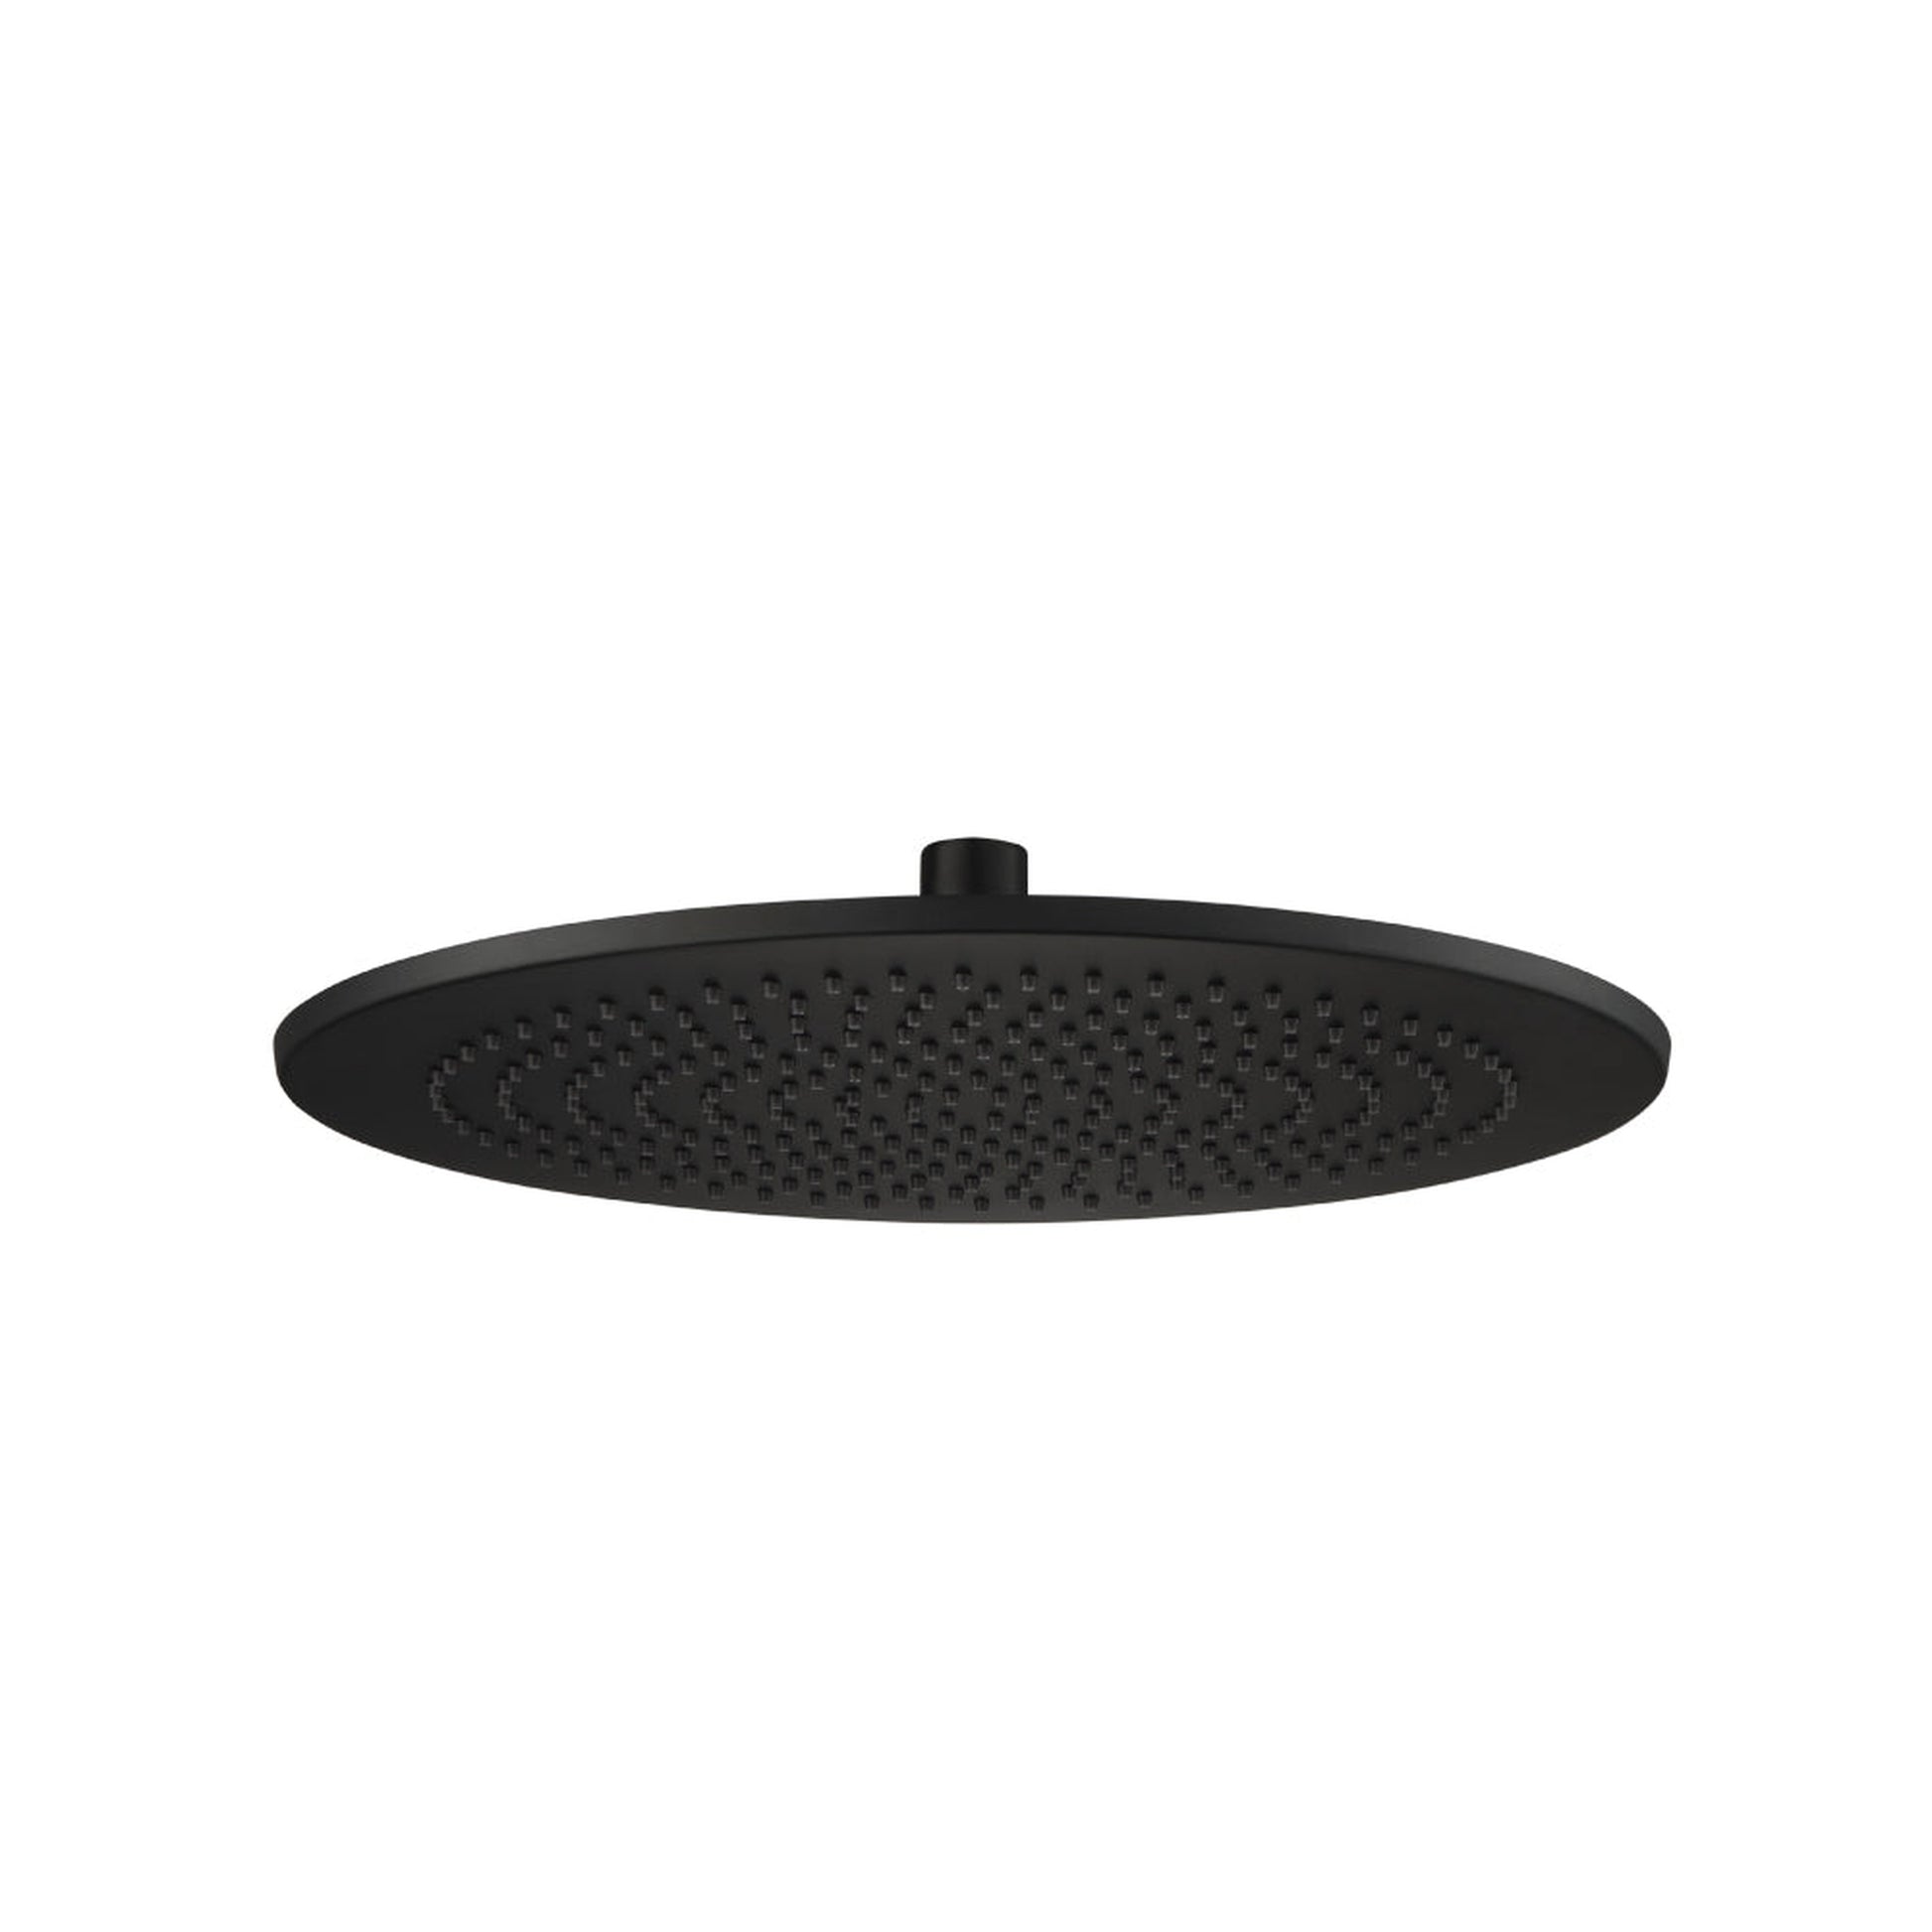 Isenberg Universal Fixtures 12" Single Function Round Matte Black Solid Brass Rain Shower Head With 6" Ceiling Mounted Shower Arm